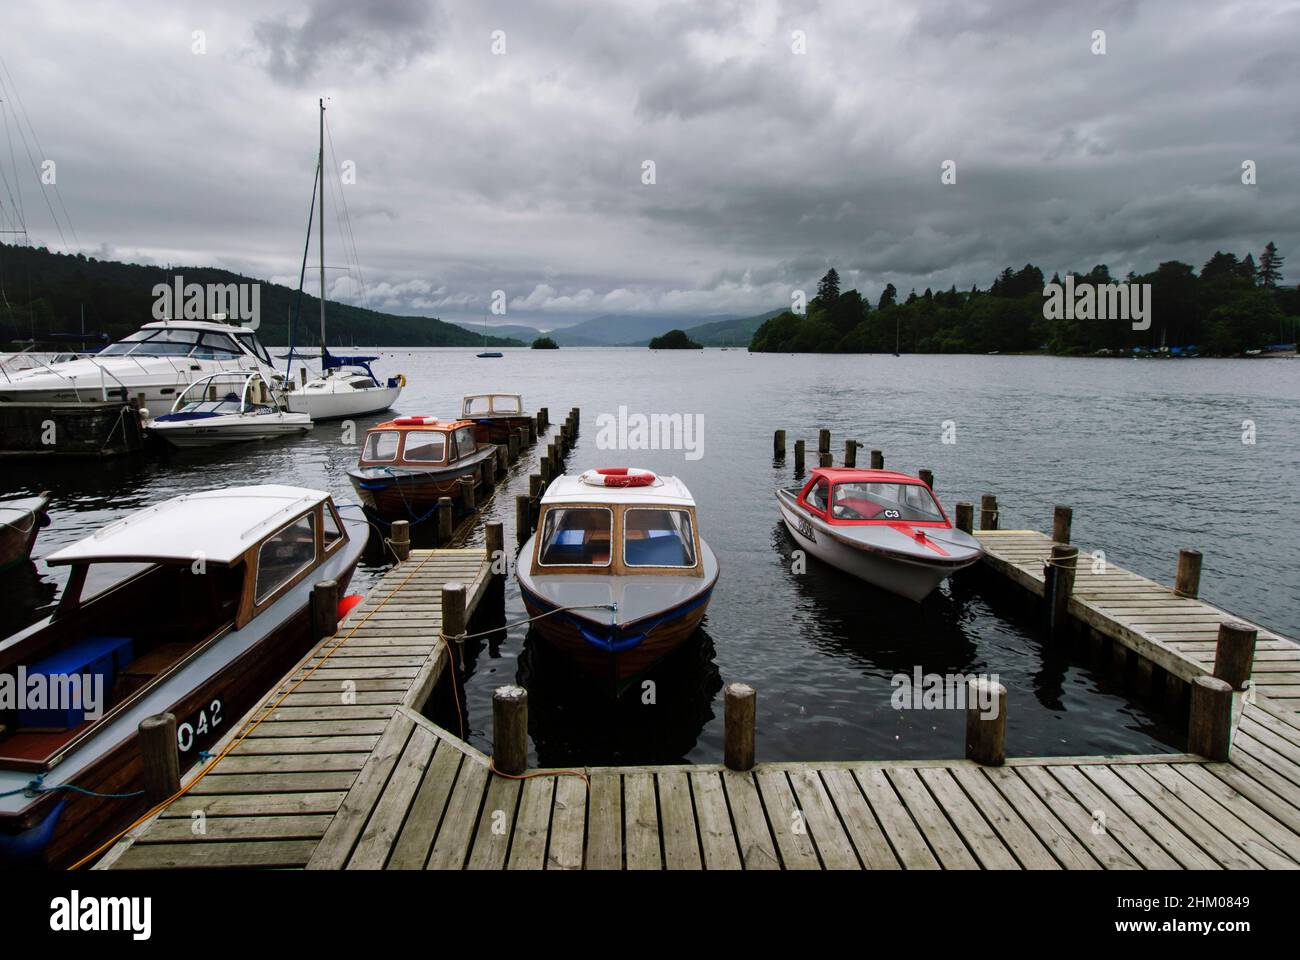 Windermere is a large lake in Cumbria’s Lake District National Park, northwest England. It’s surrounded by mountain peaks and villages, including Bown Stock Photo